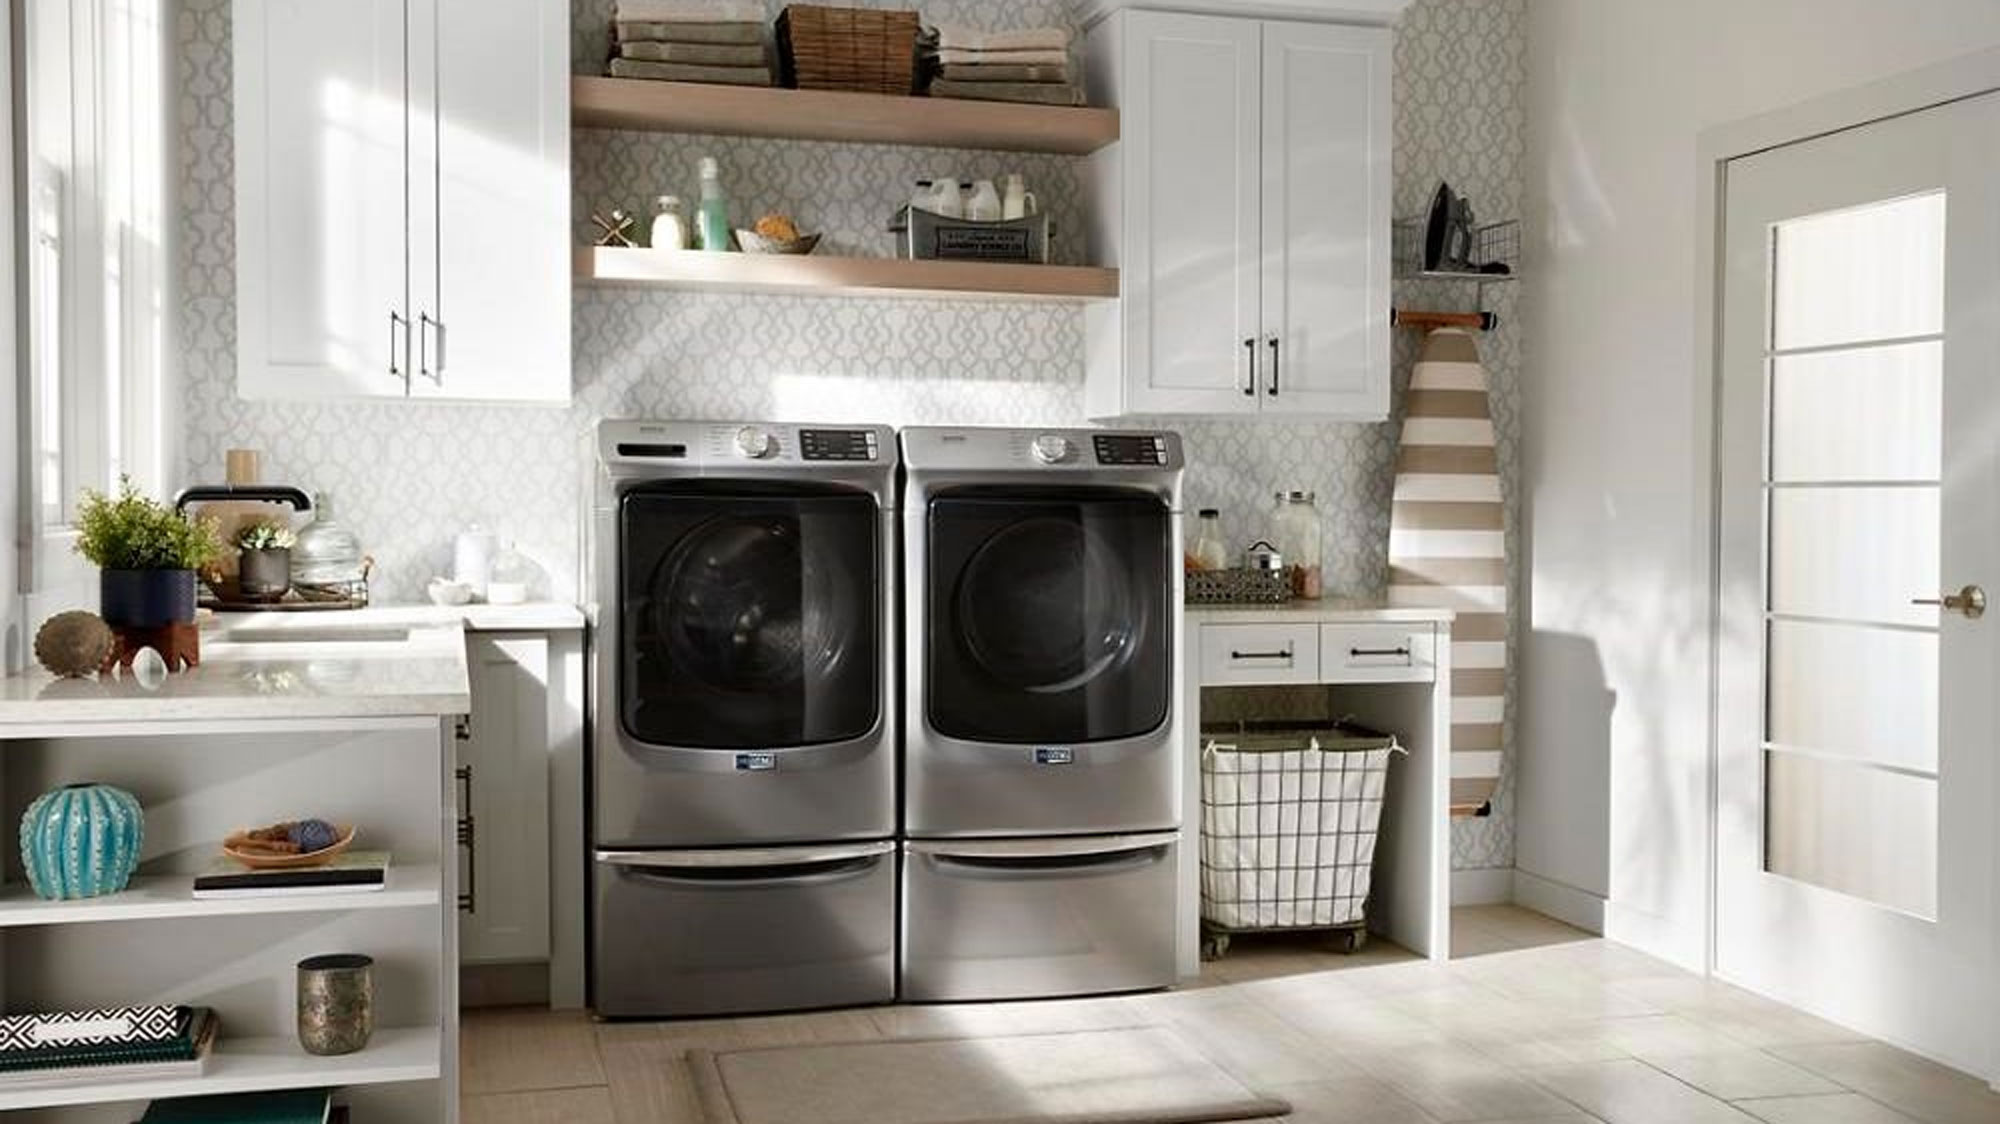 The Maytag front-load washer set up in a modern home.